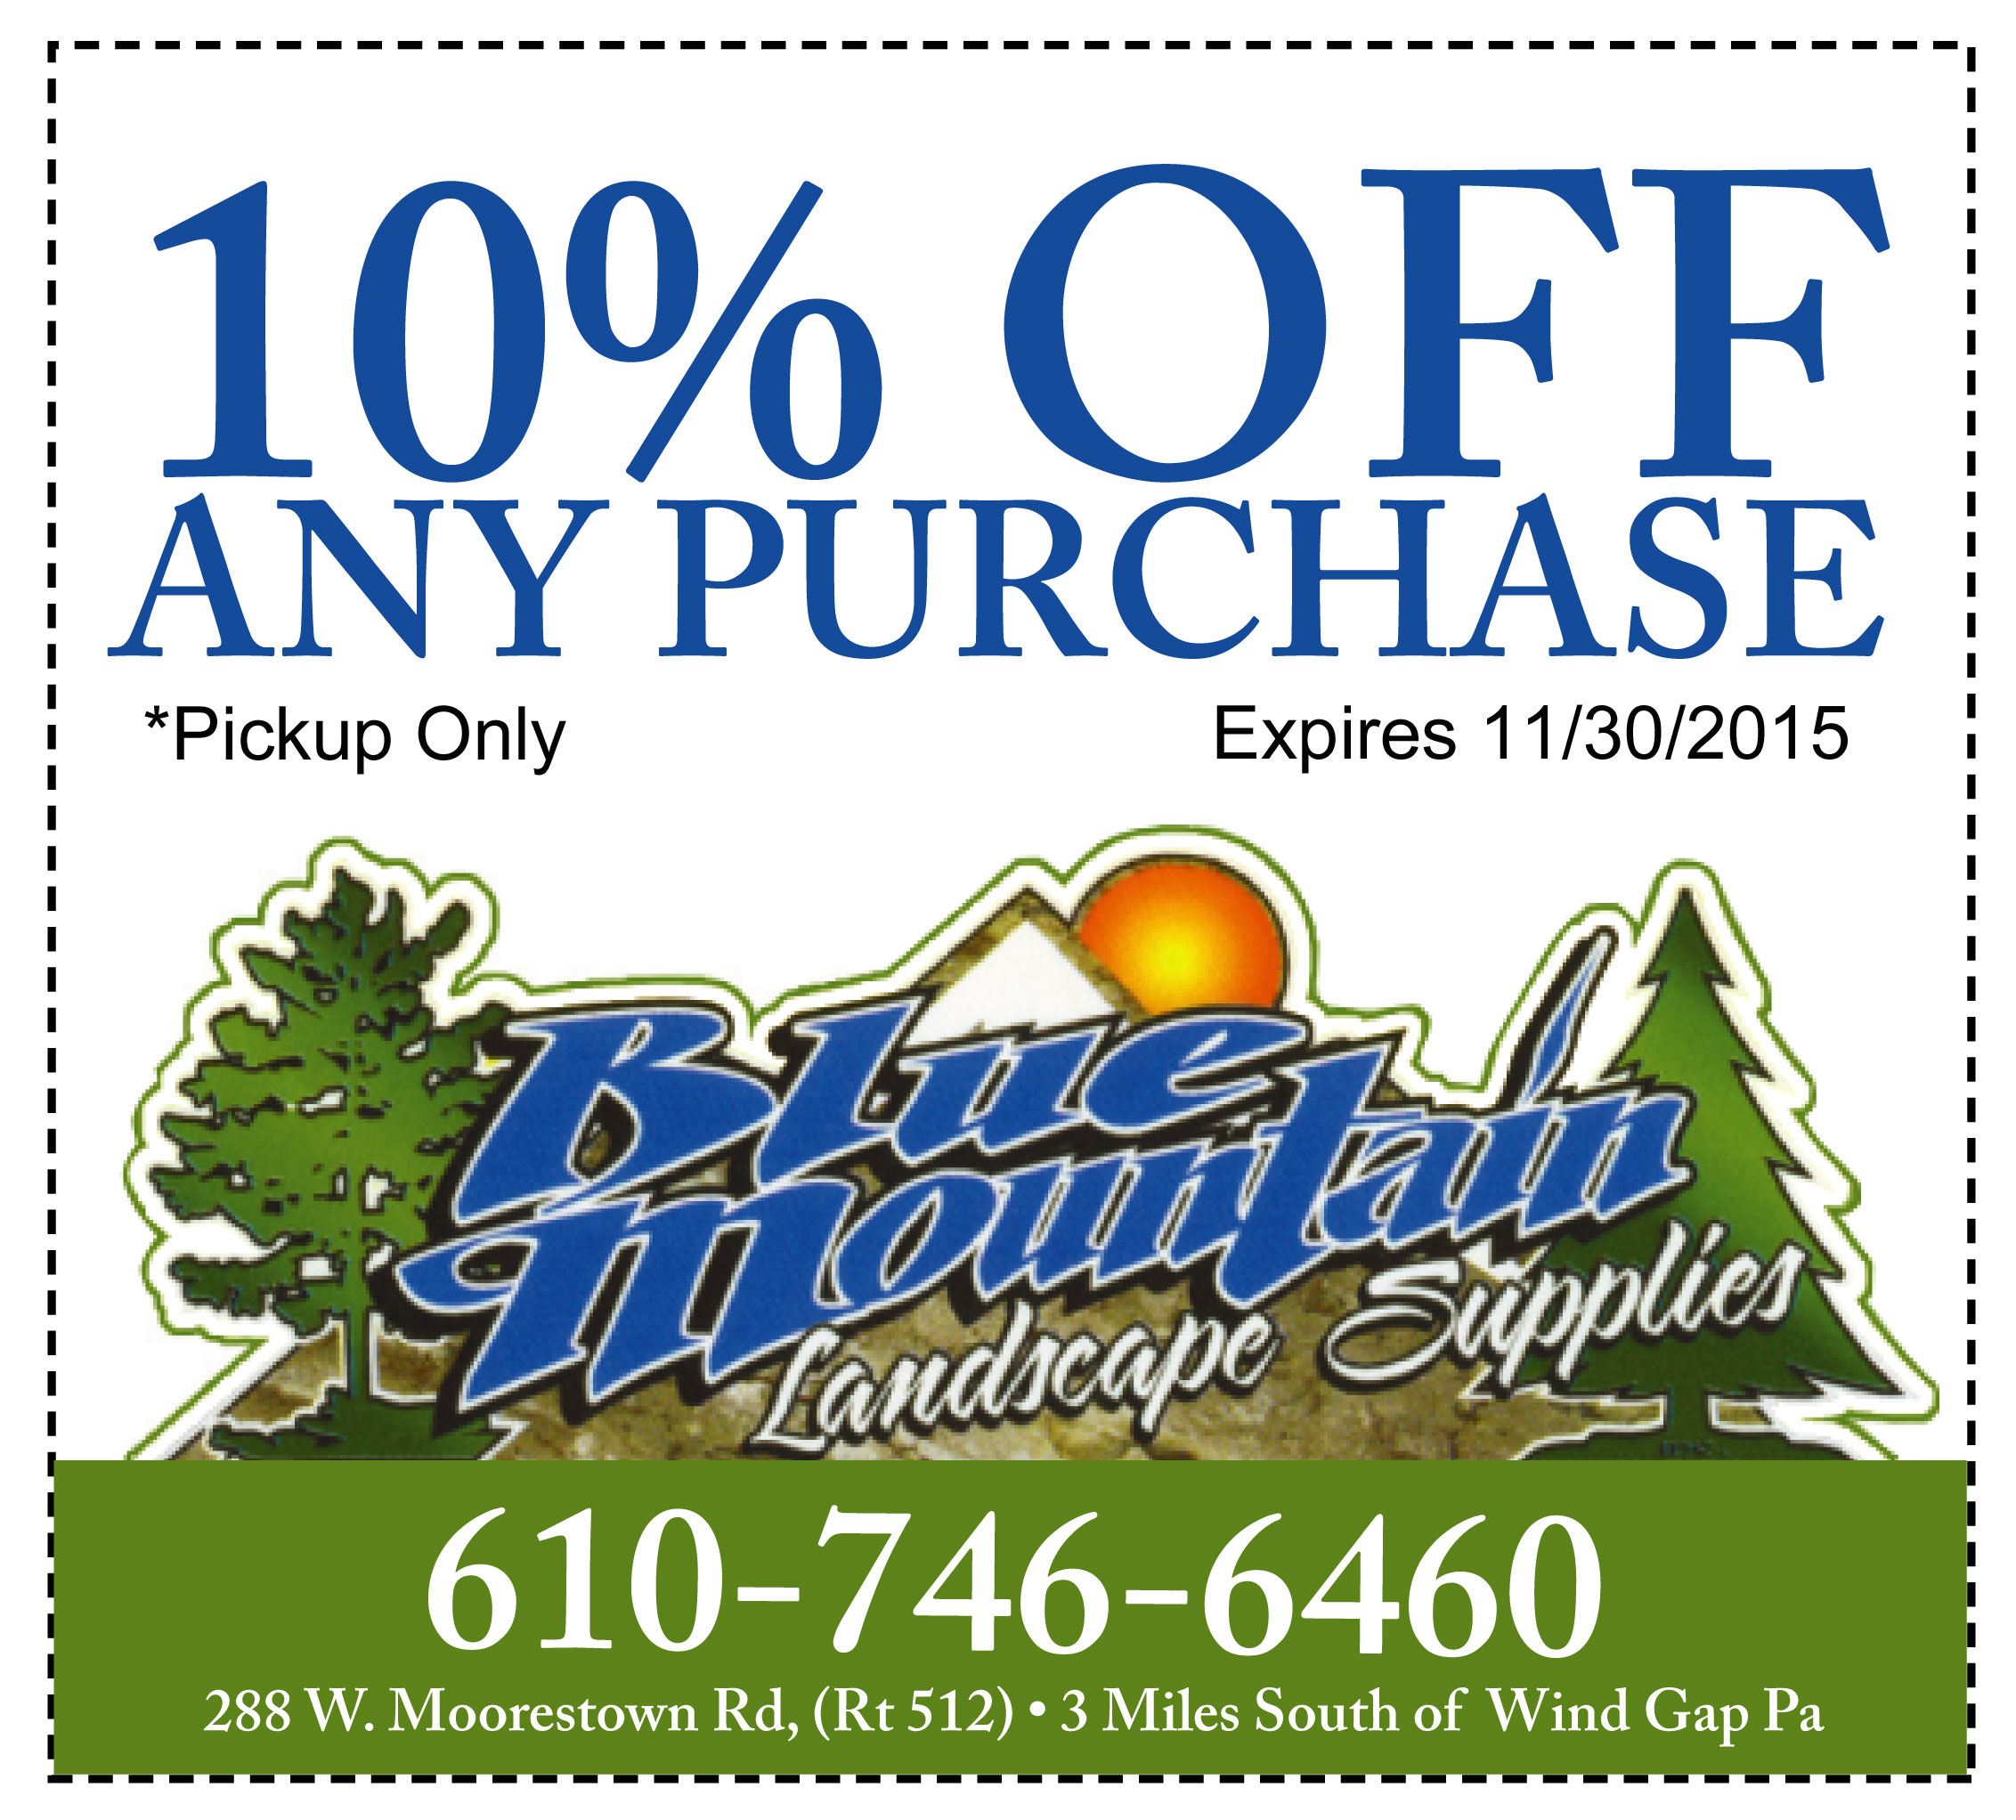 Landscaping Supplies Discount Coupon Lehigh Valley 10% Off